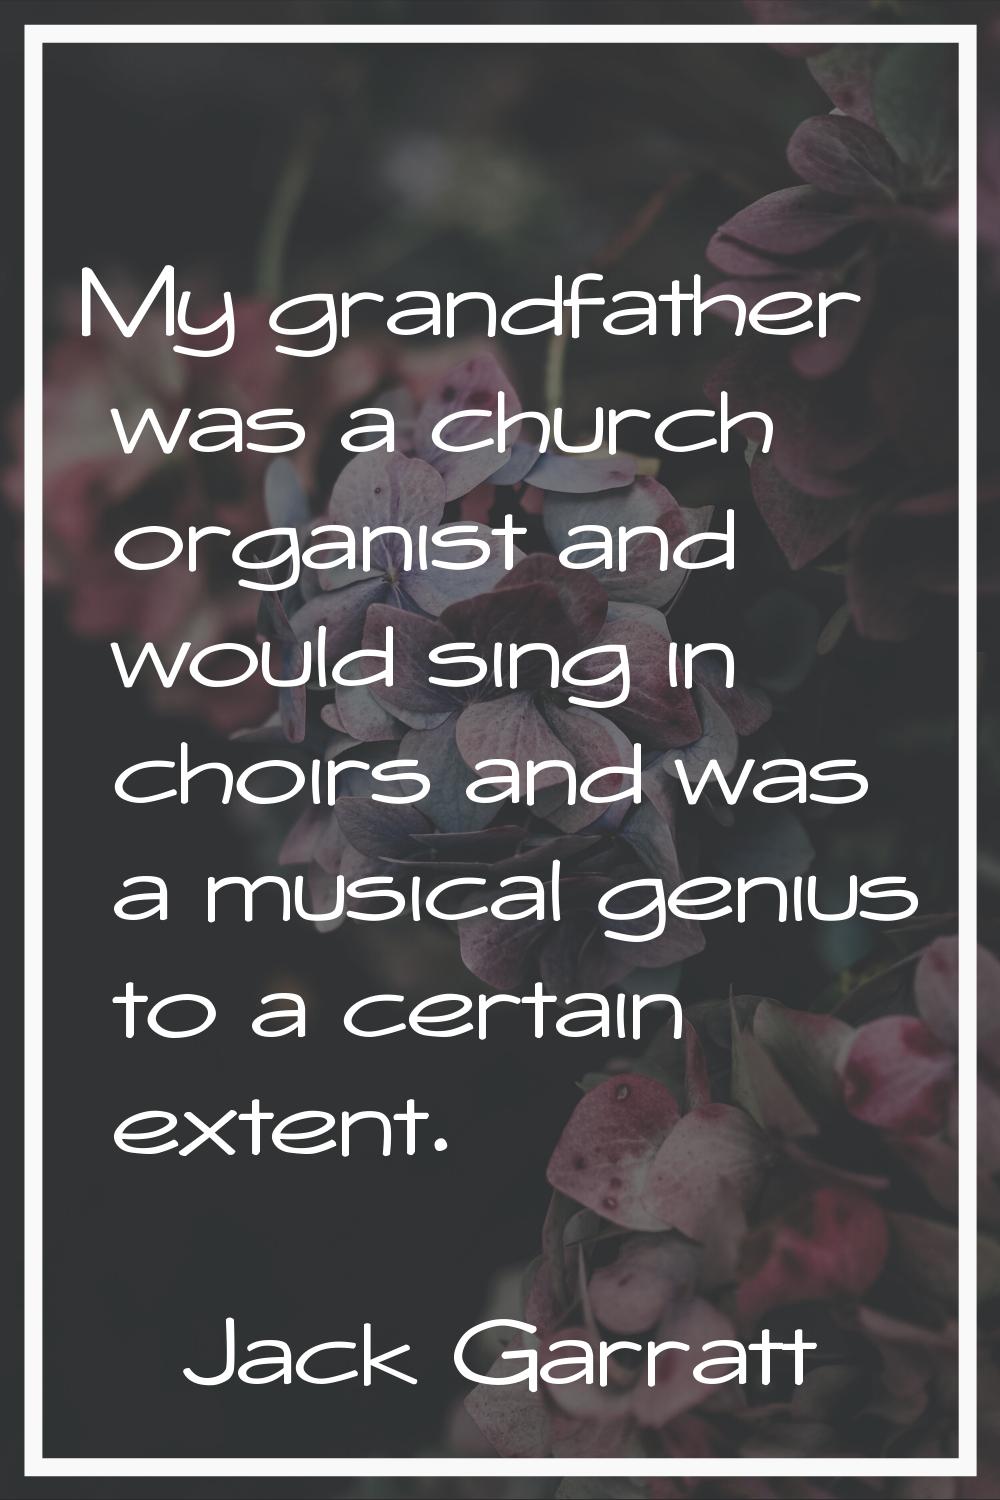 My grandfather was a church organist and would sing in choirs and was a musical genius to a certain